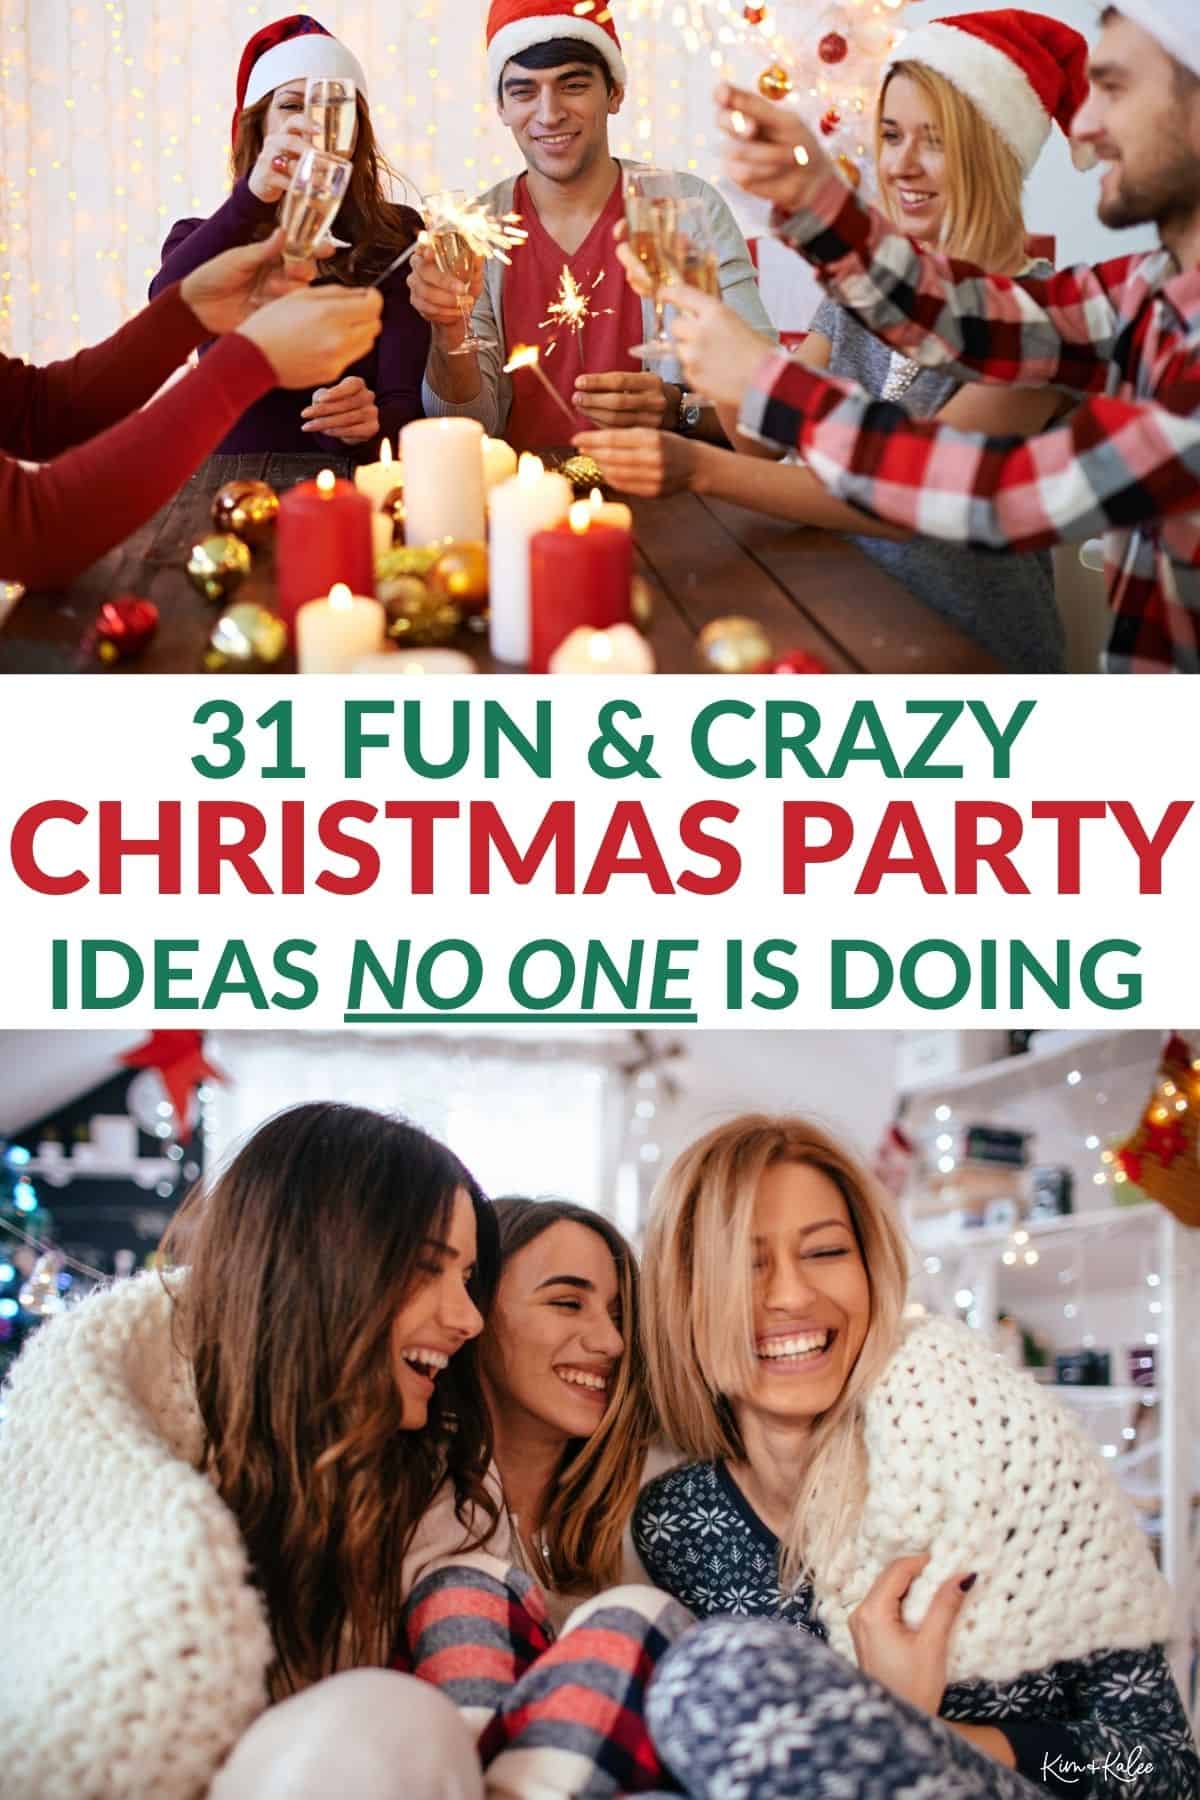 collage of 2 pictures with friends at Christmas - text overlay in the middle says Crazy Christmas Party Ideas no one is doing